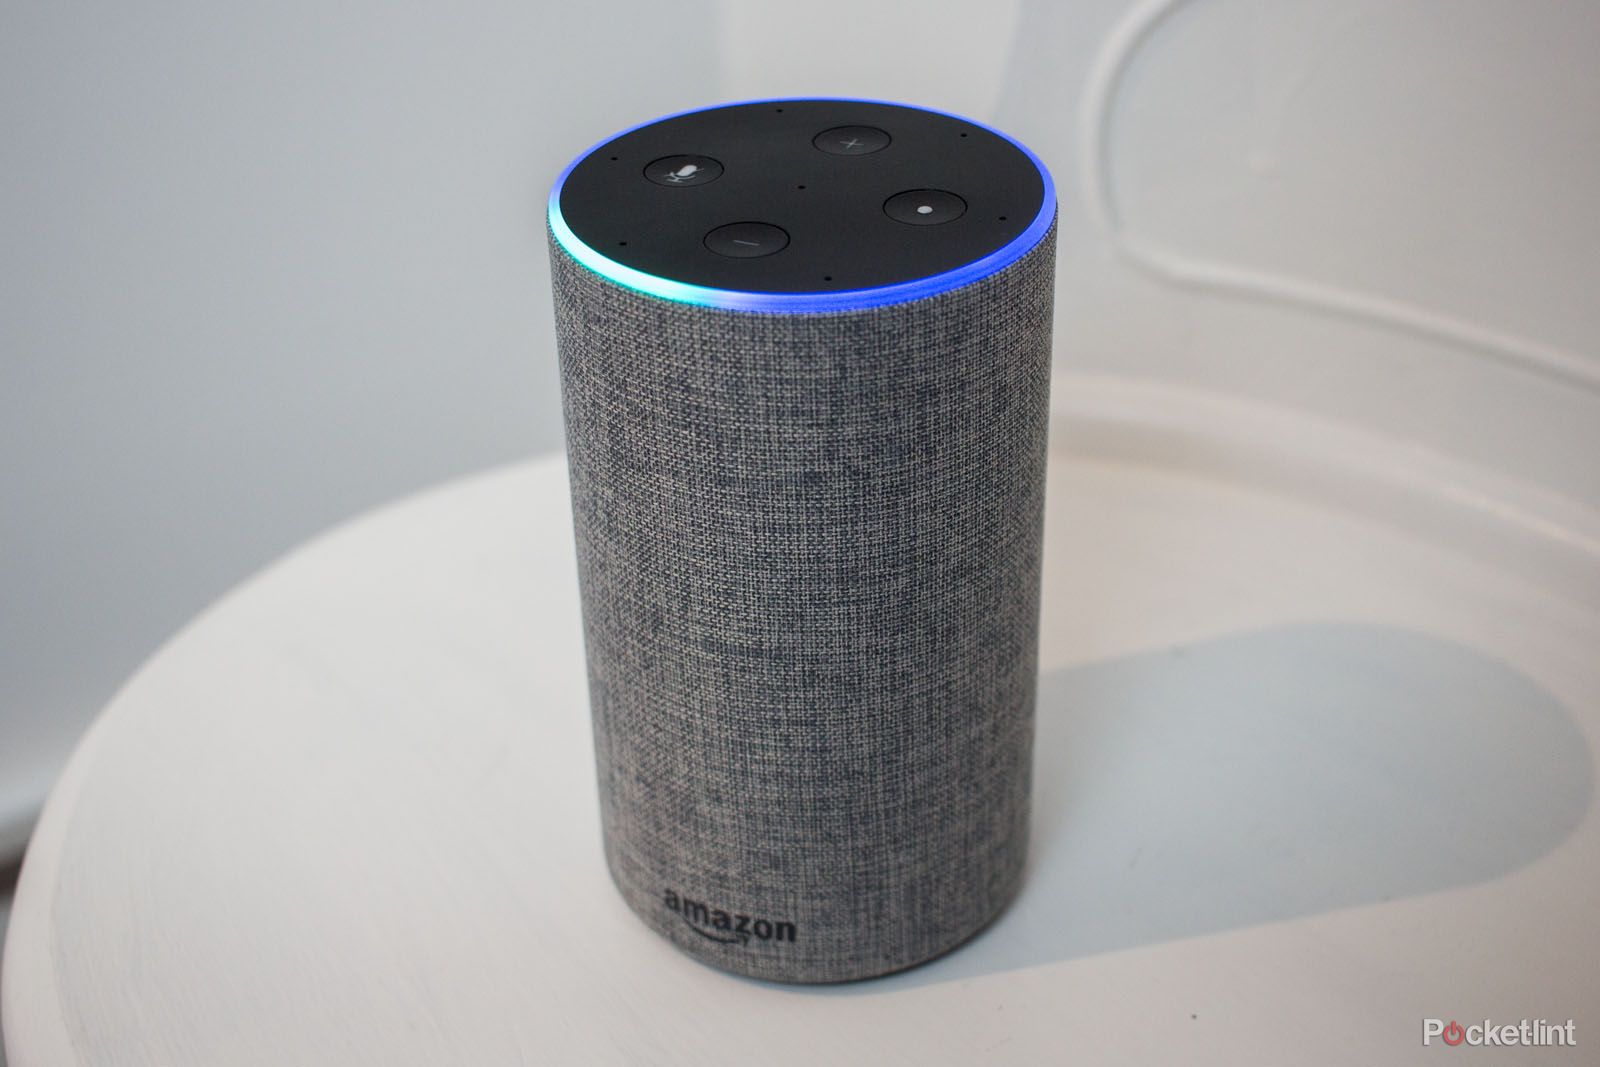 Now you can ask Alexa about your summer cold instead of bothering your doctor image 1